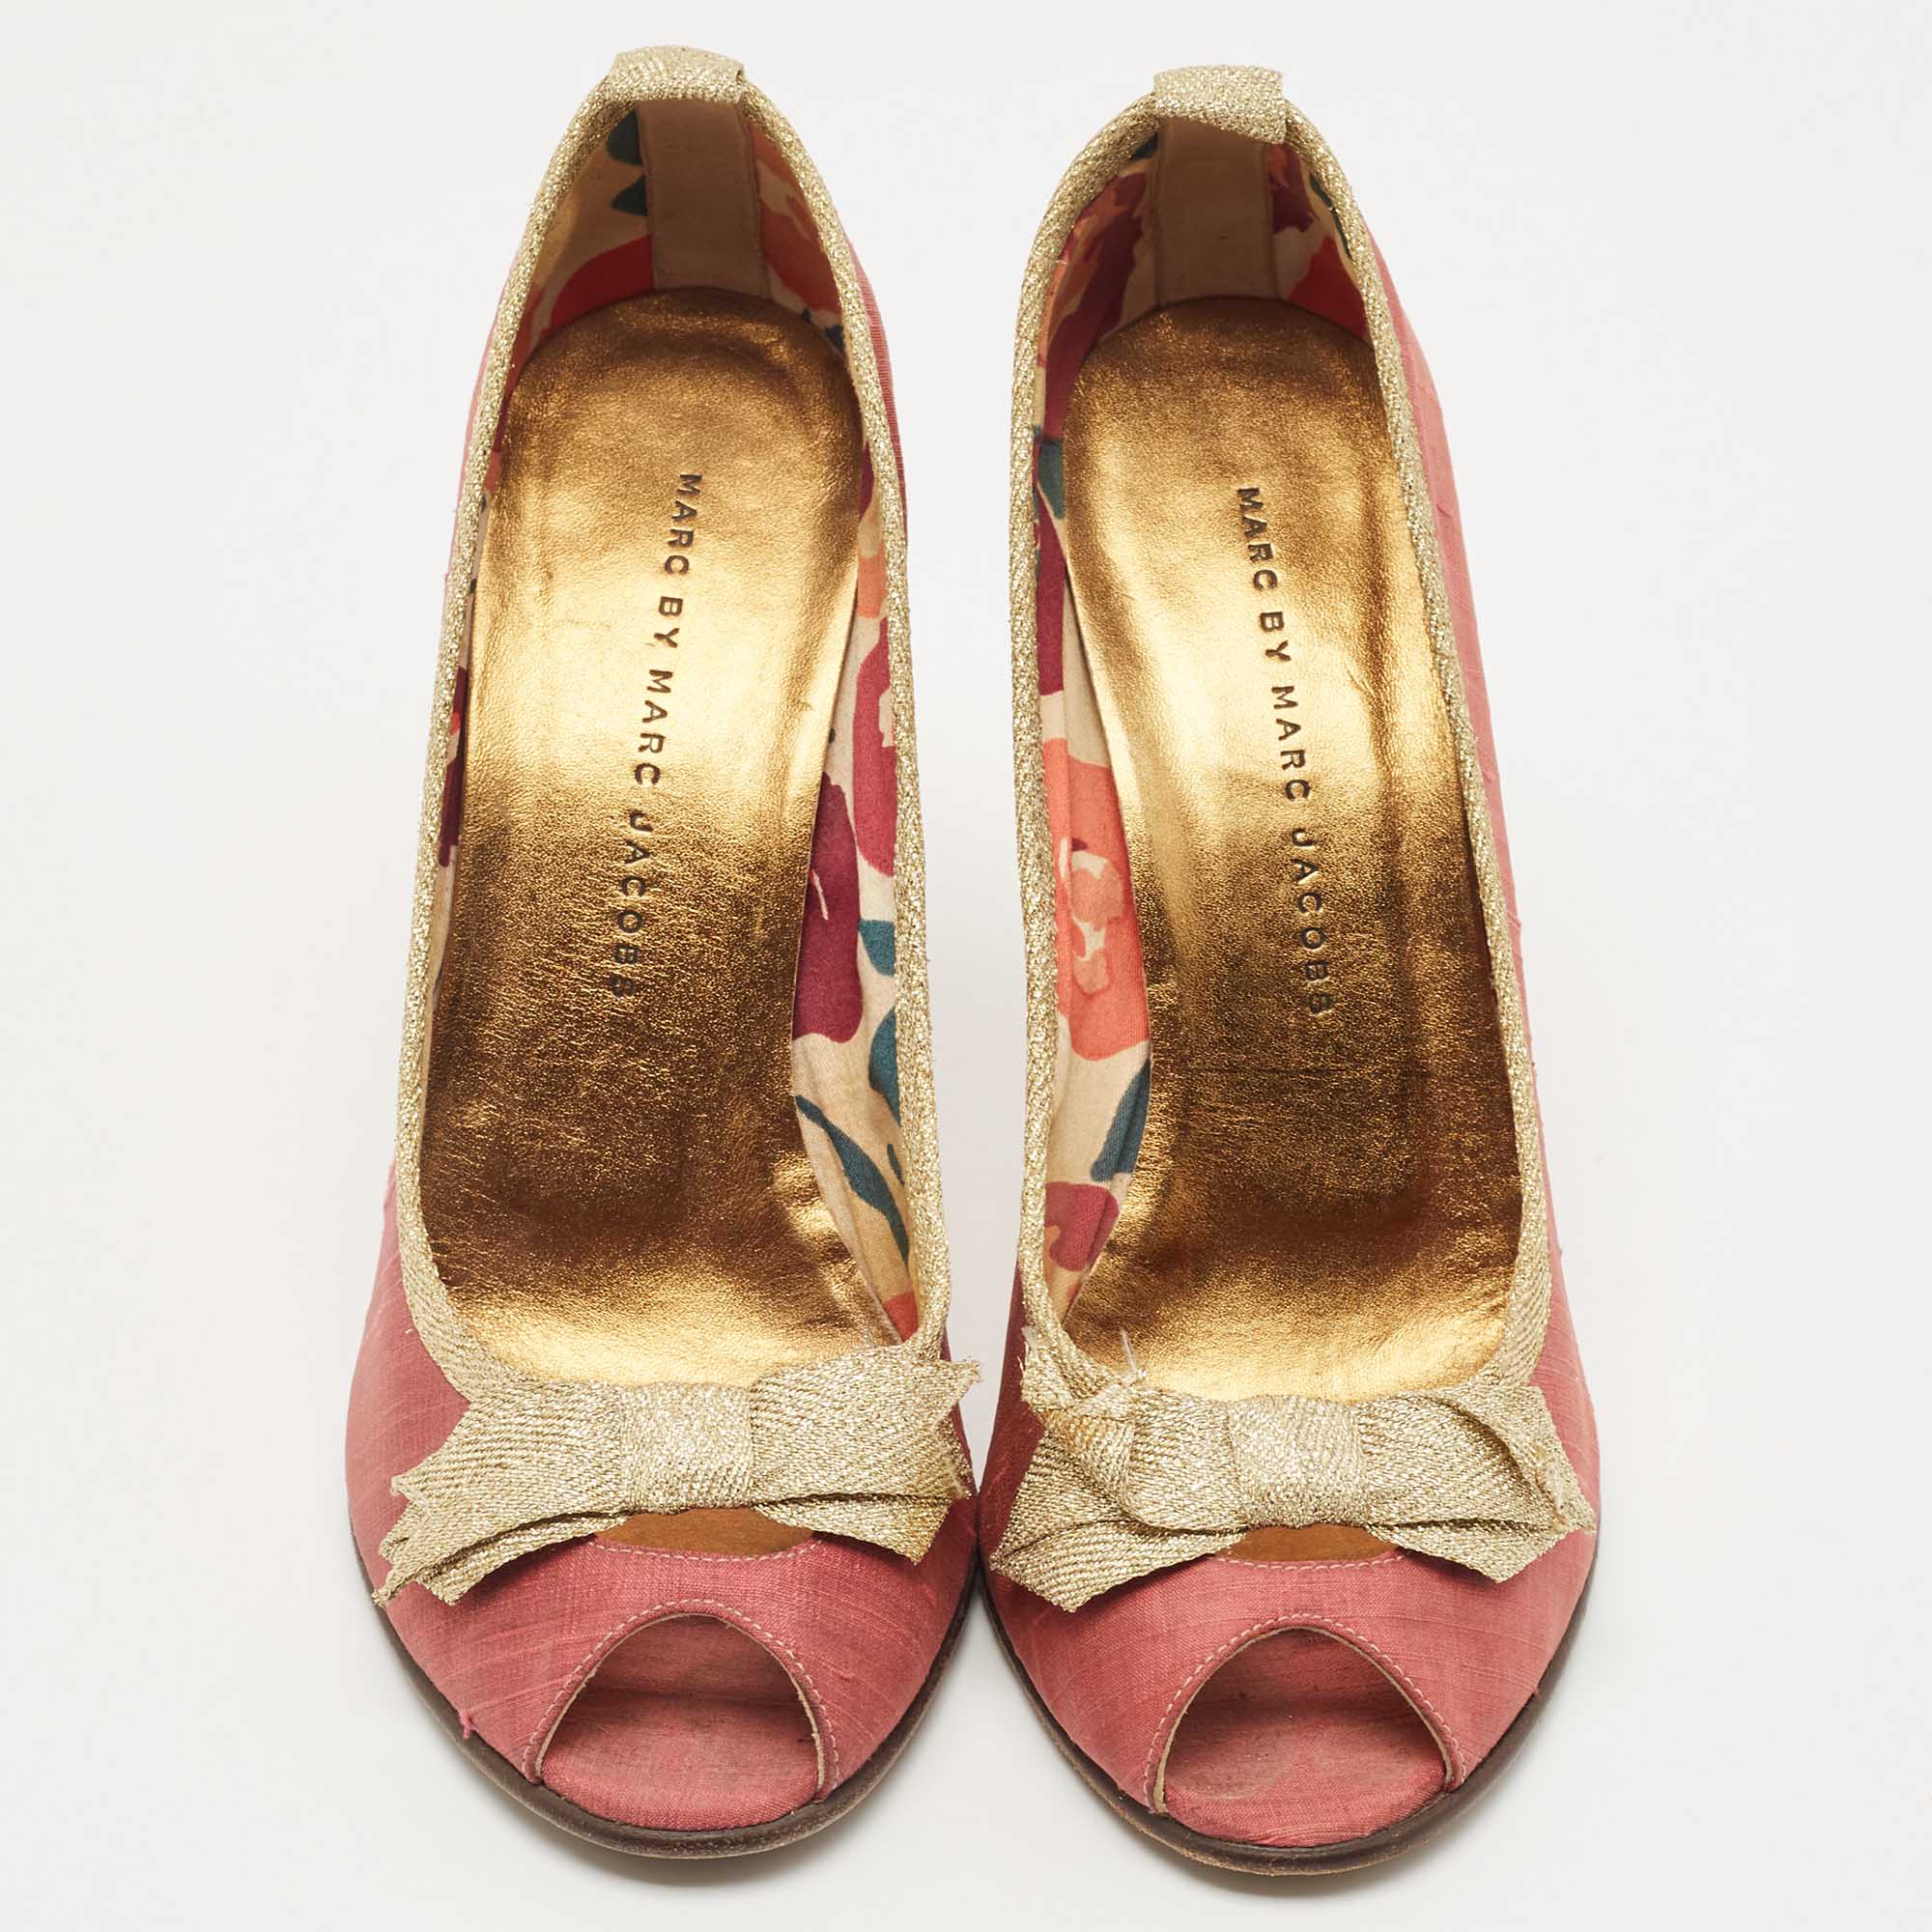 Marc By Marc Jacobs Pink Fabric Bow Detail Open Toe Pumps Size 37